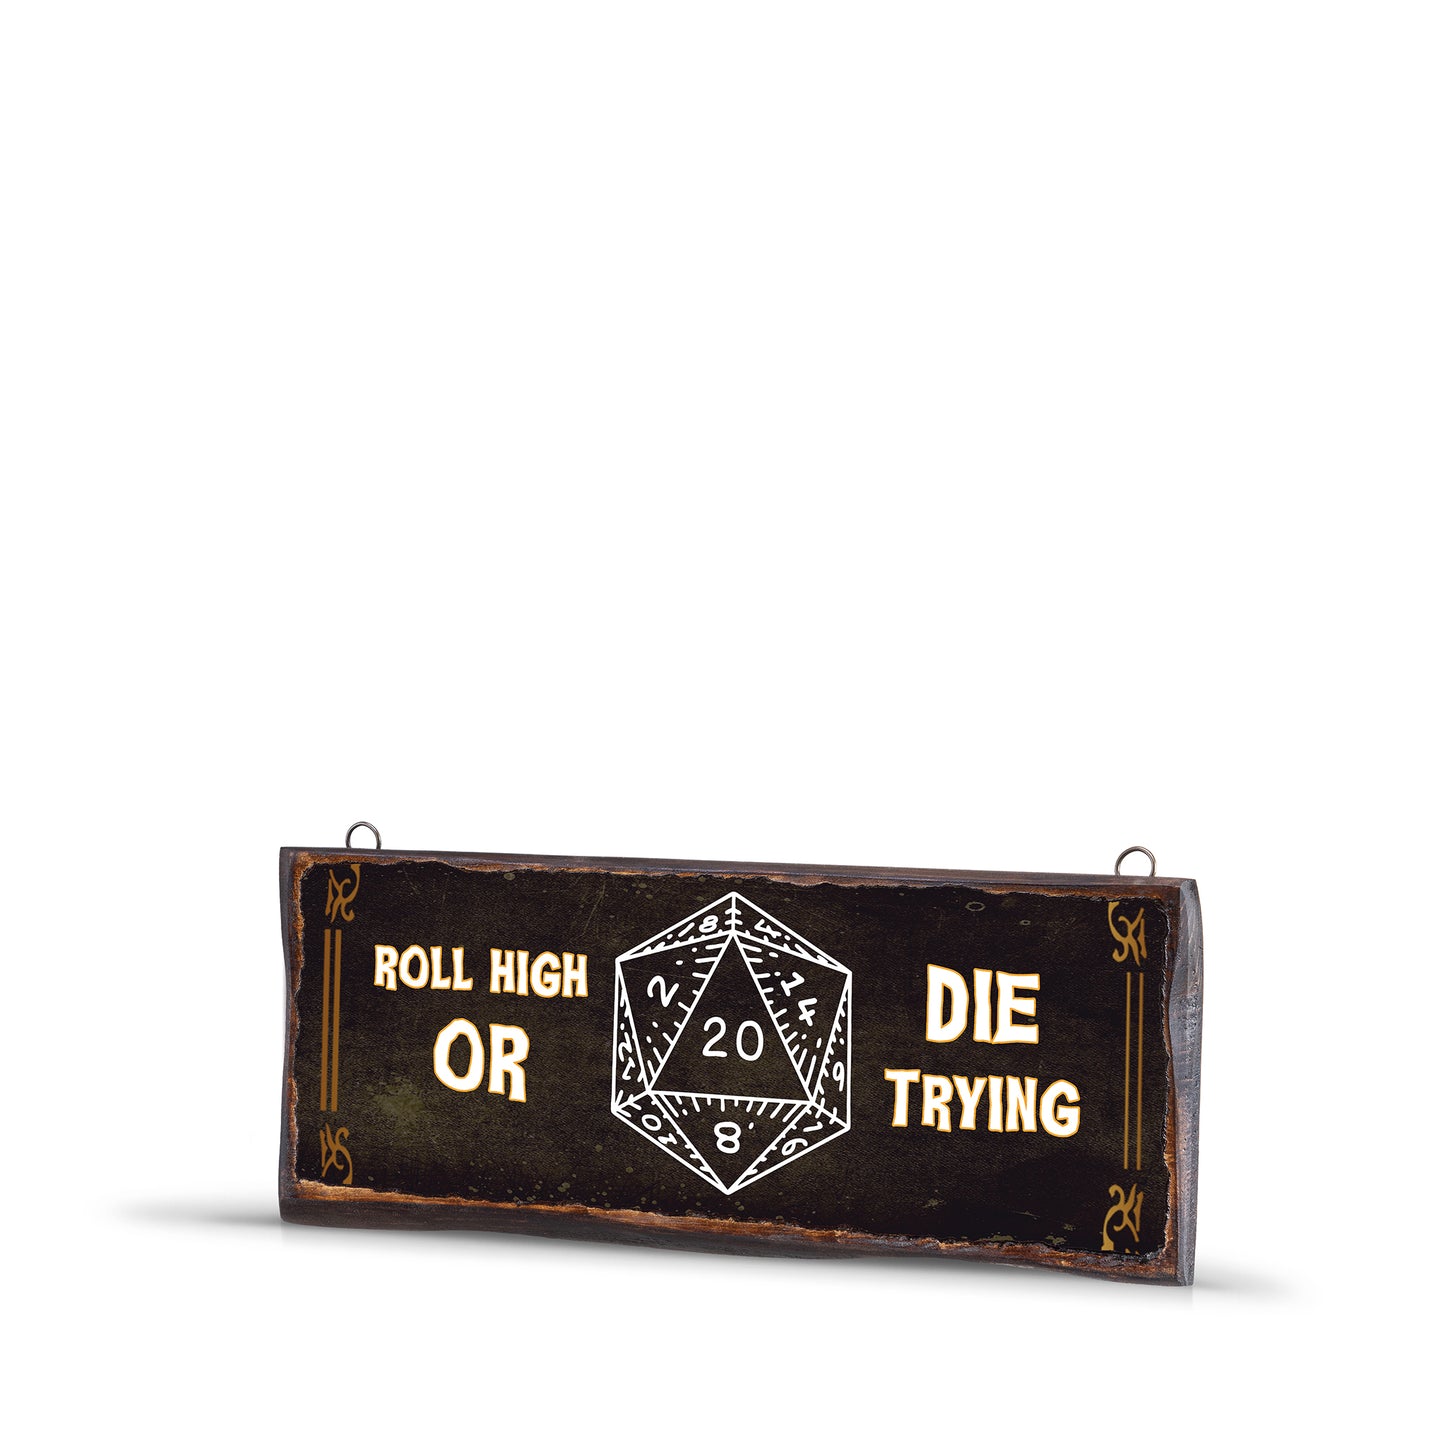 ROLL HIGH OR DIE TRYING WOODEN SIGN - WS035